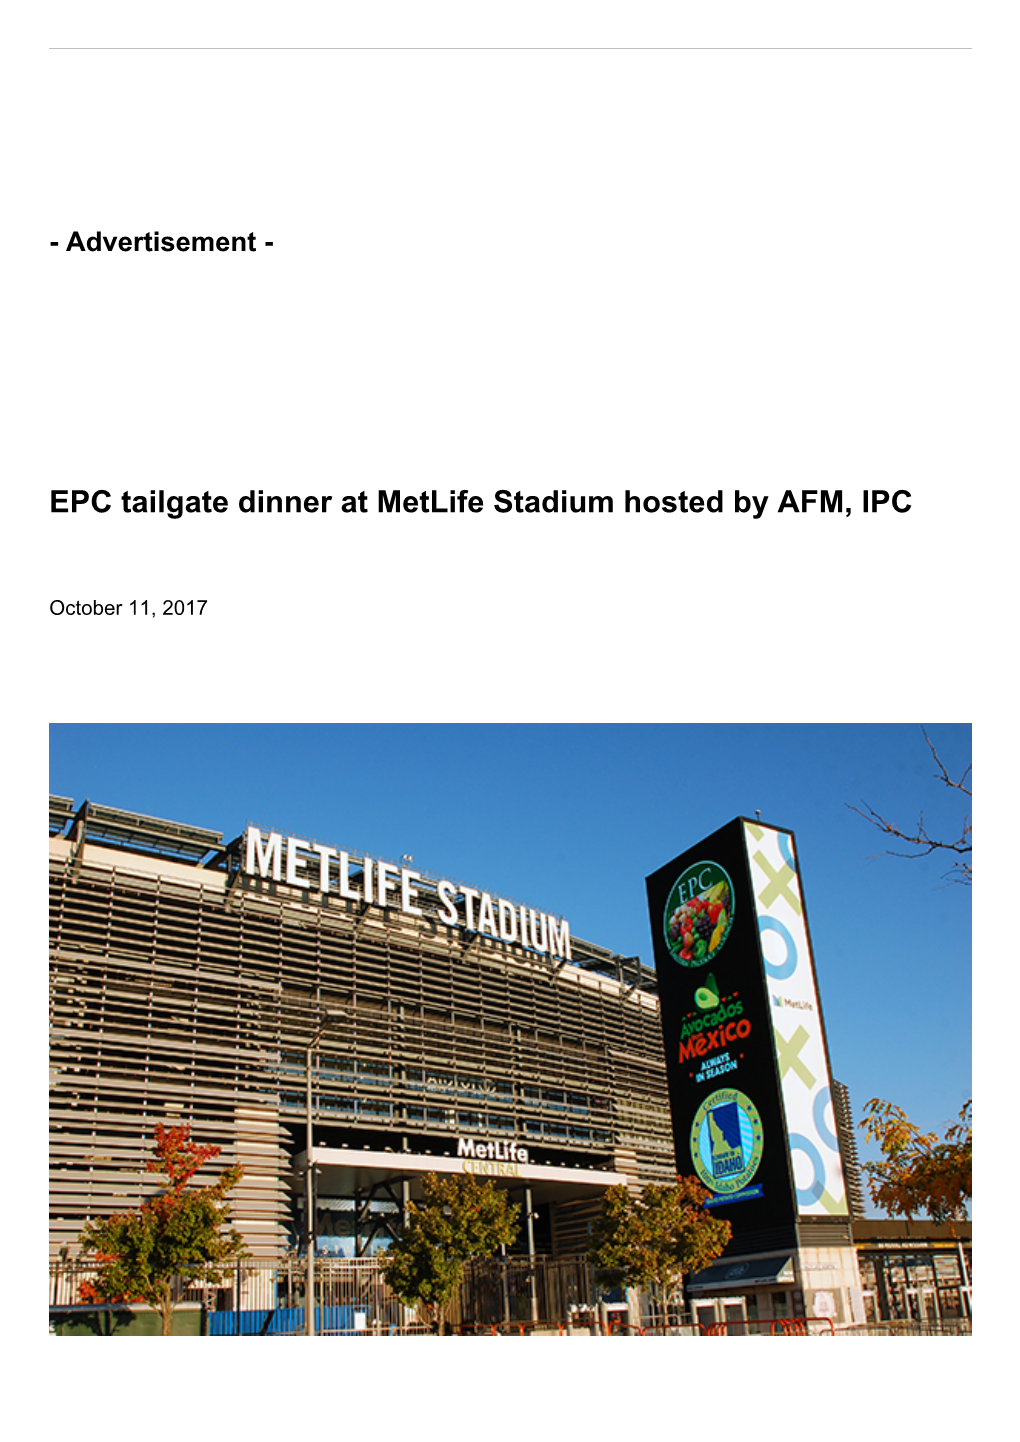 EPC Tailgate Dinner at Metlife Stadium Hosted by AFM, IPC